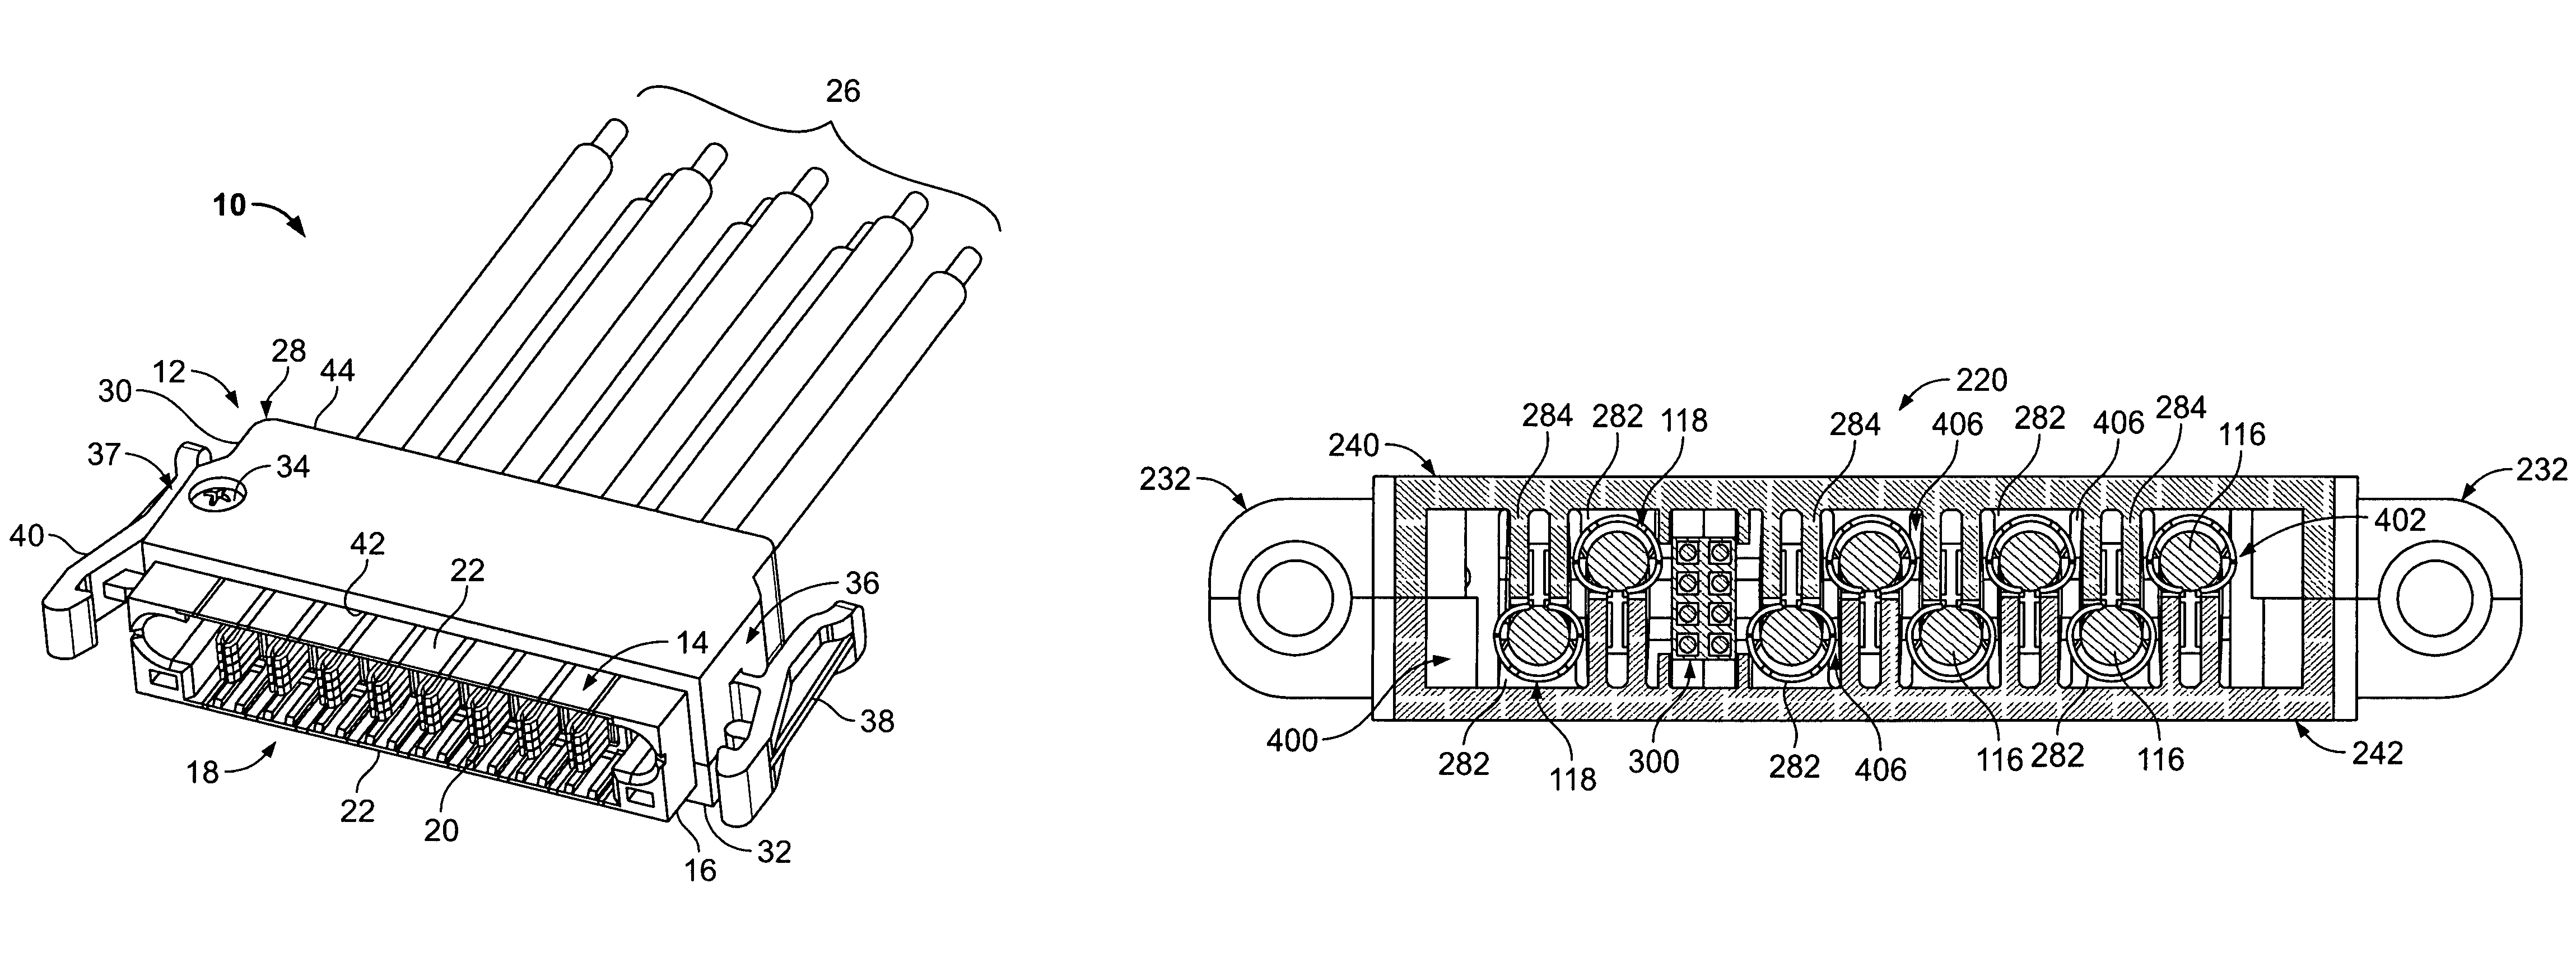 Electrical connector and backshell